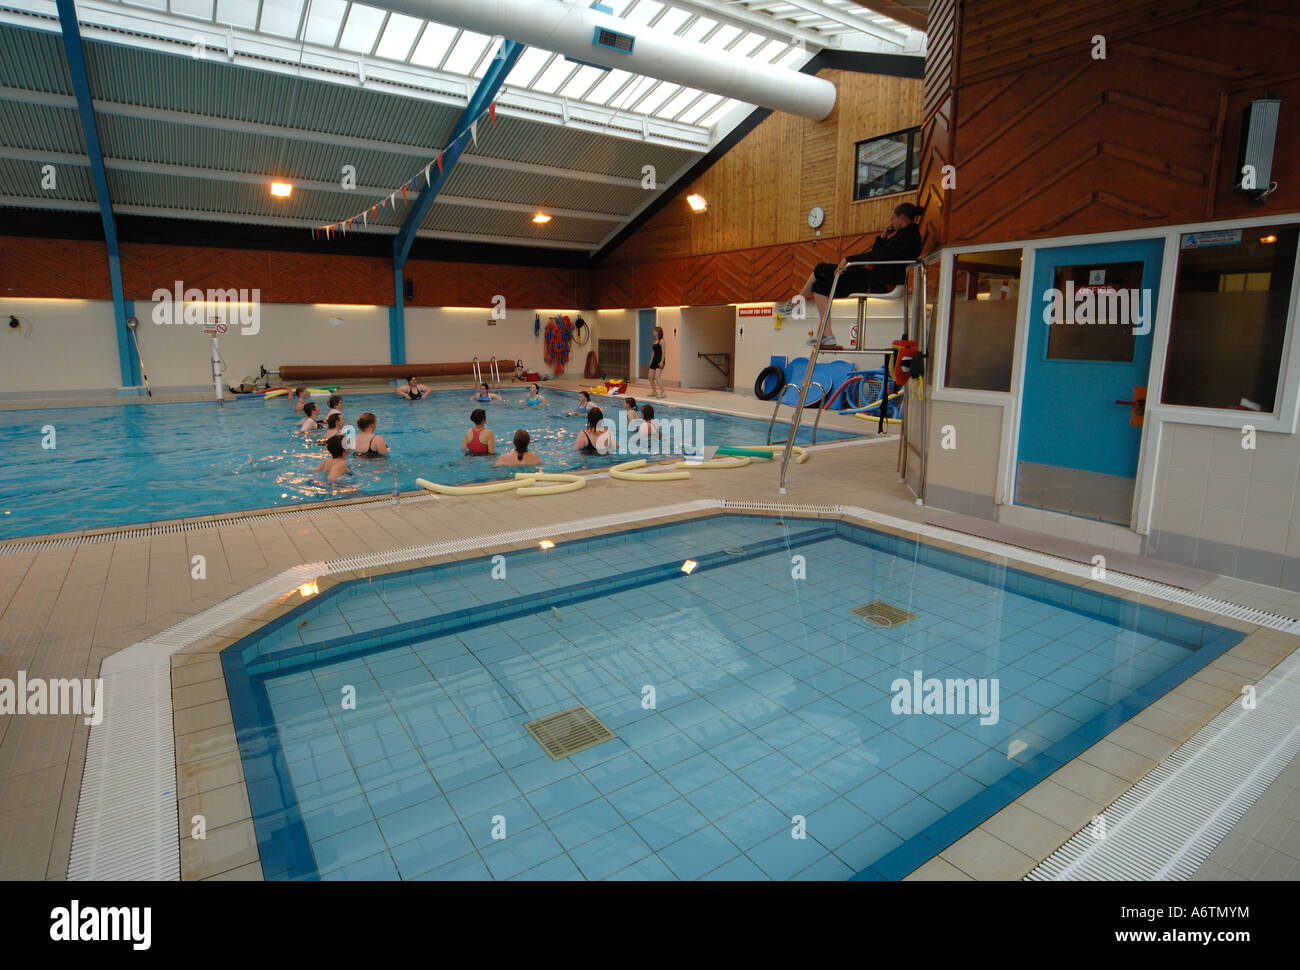 https://c8.alamy.com/comp/A6TMYM/stanley-leisure-centre-swimming-pool-in-stanley-the-capital-of-the-A6TMYM.jpg